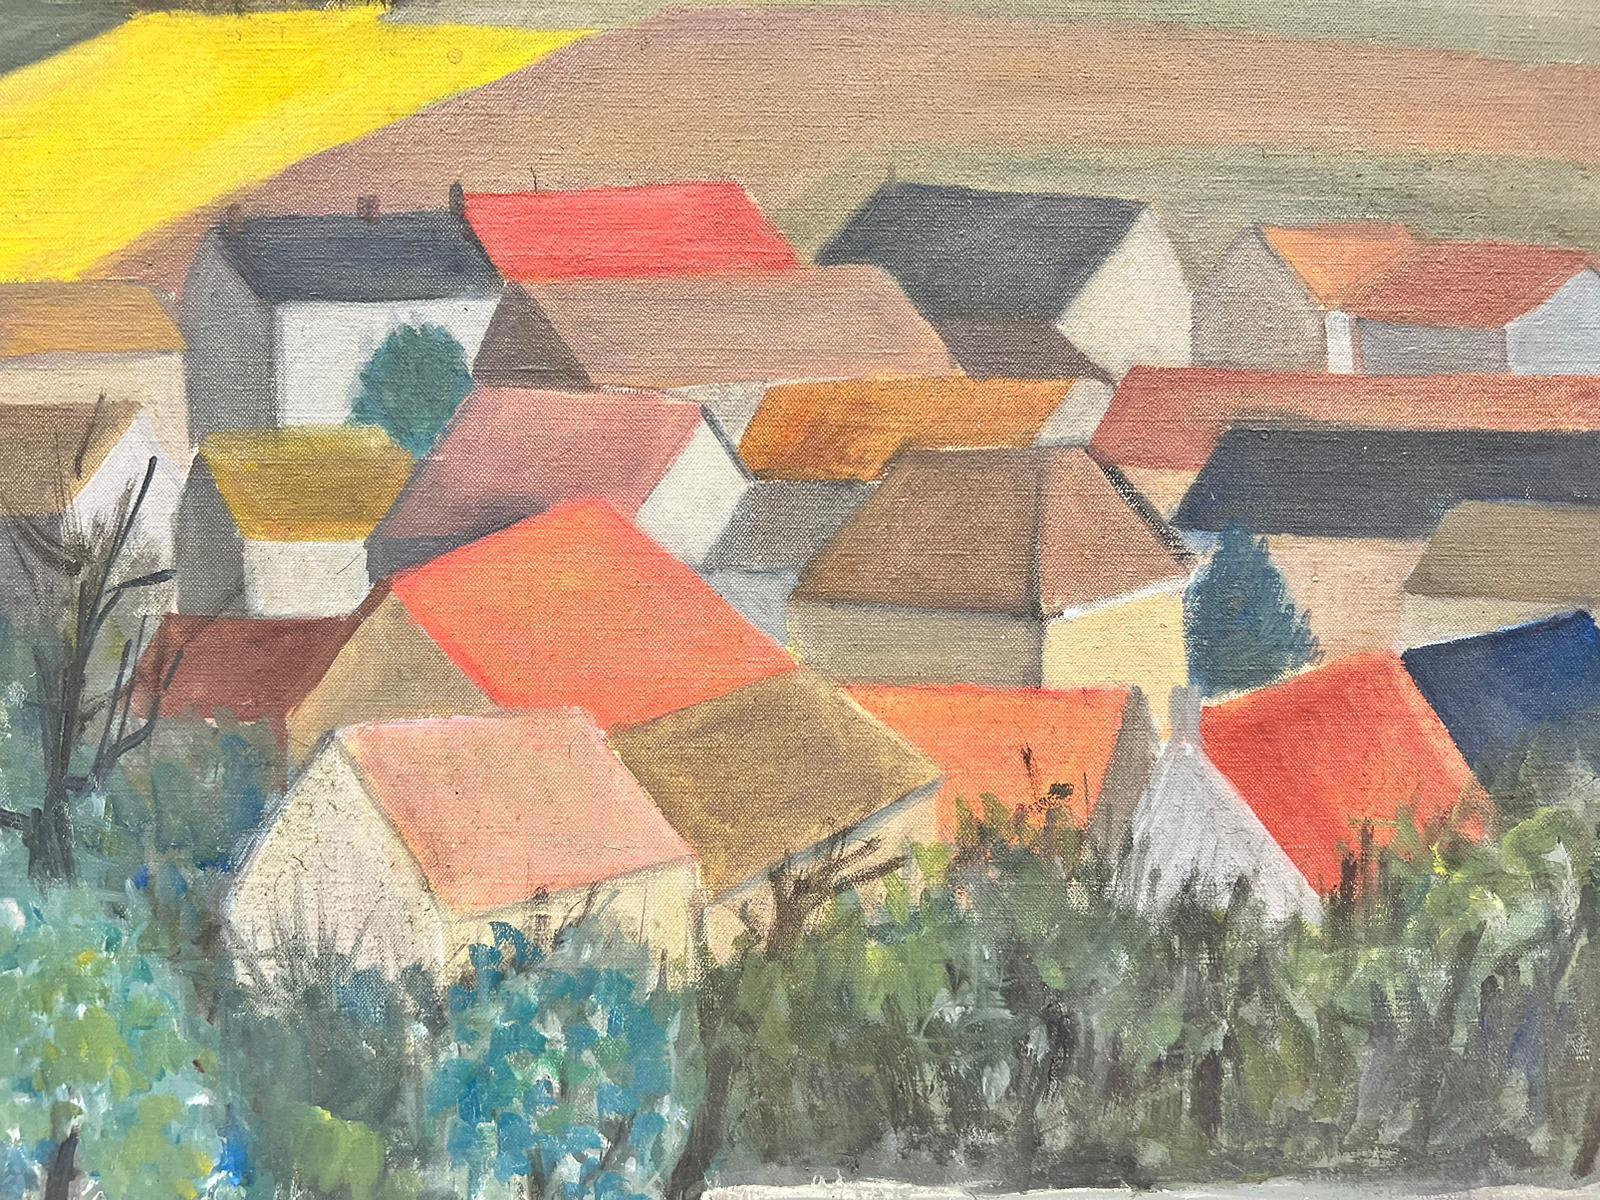 Mid Century French Cubist/ Post Impressionist Oil Red Roof Houses in Landscape - Post-Impressionist Painting by French Post Impressionist